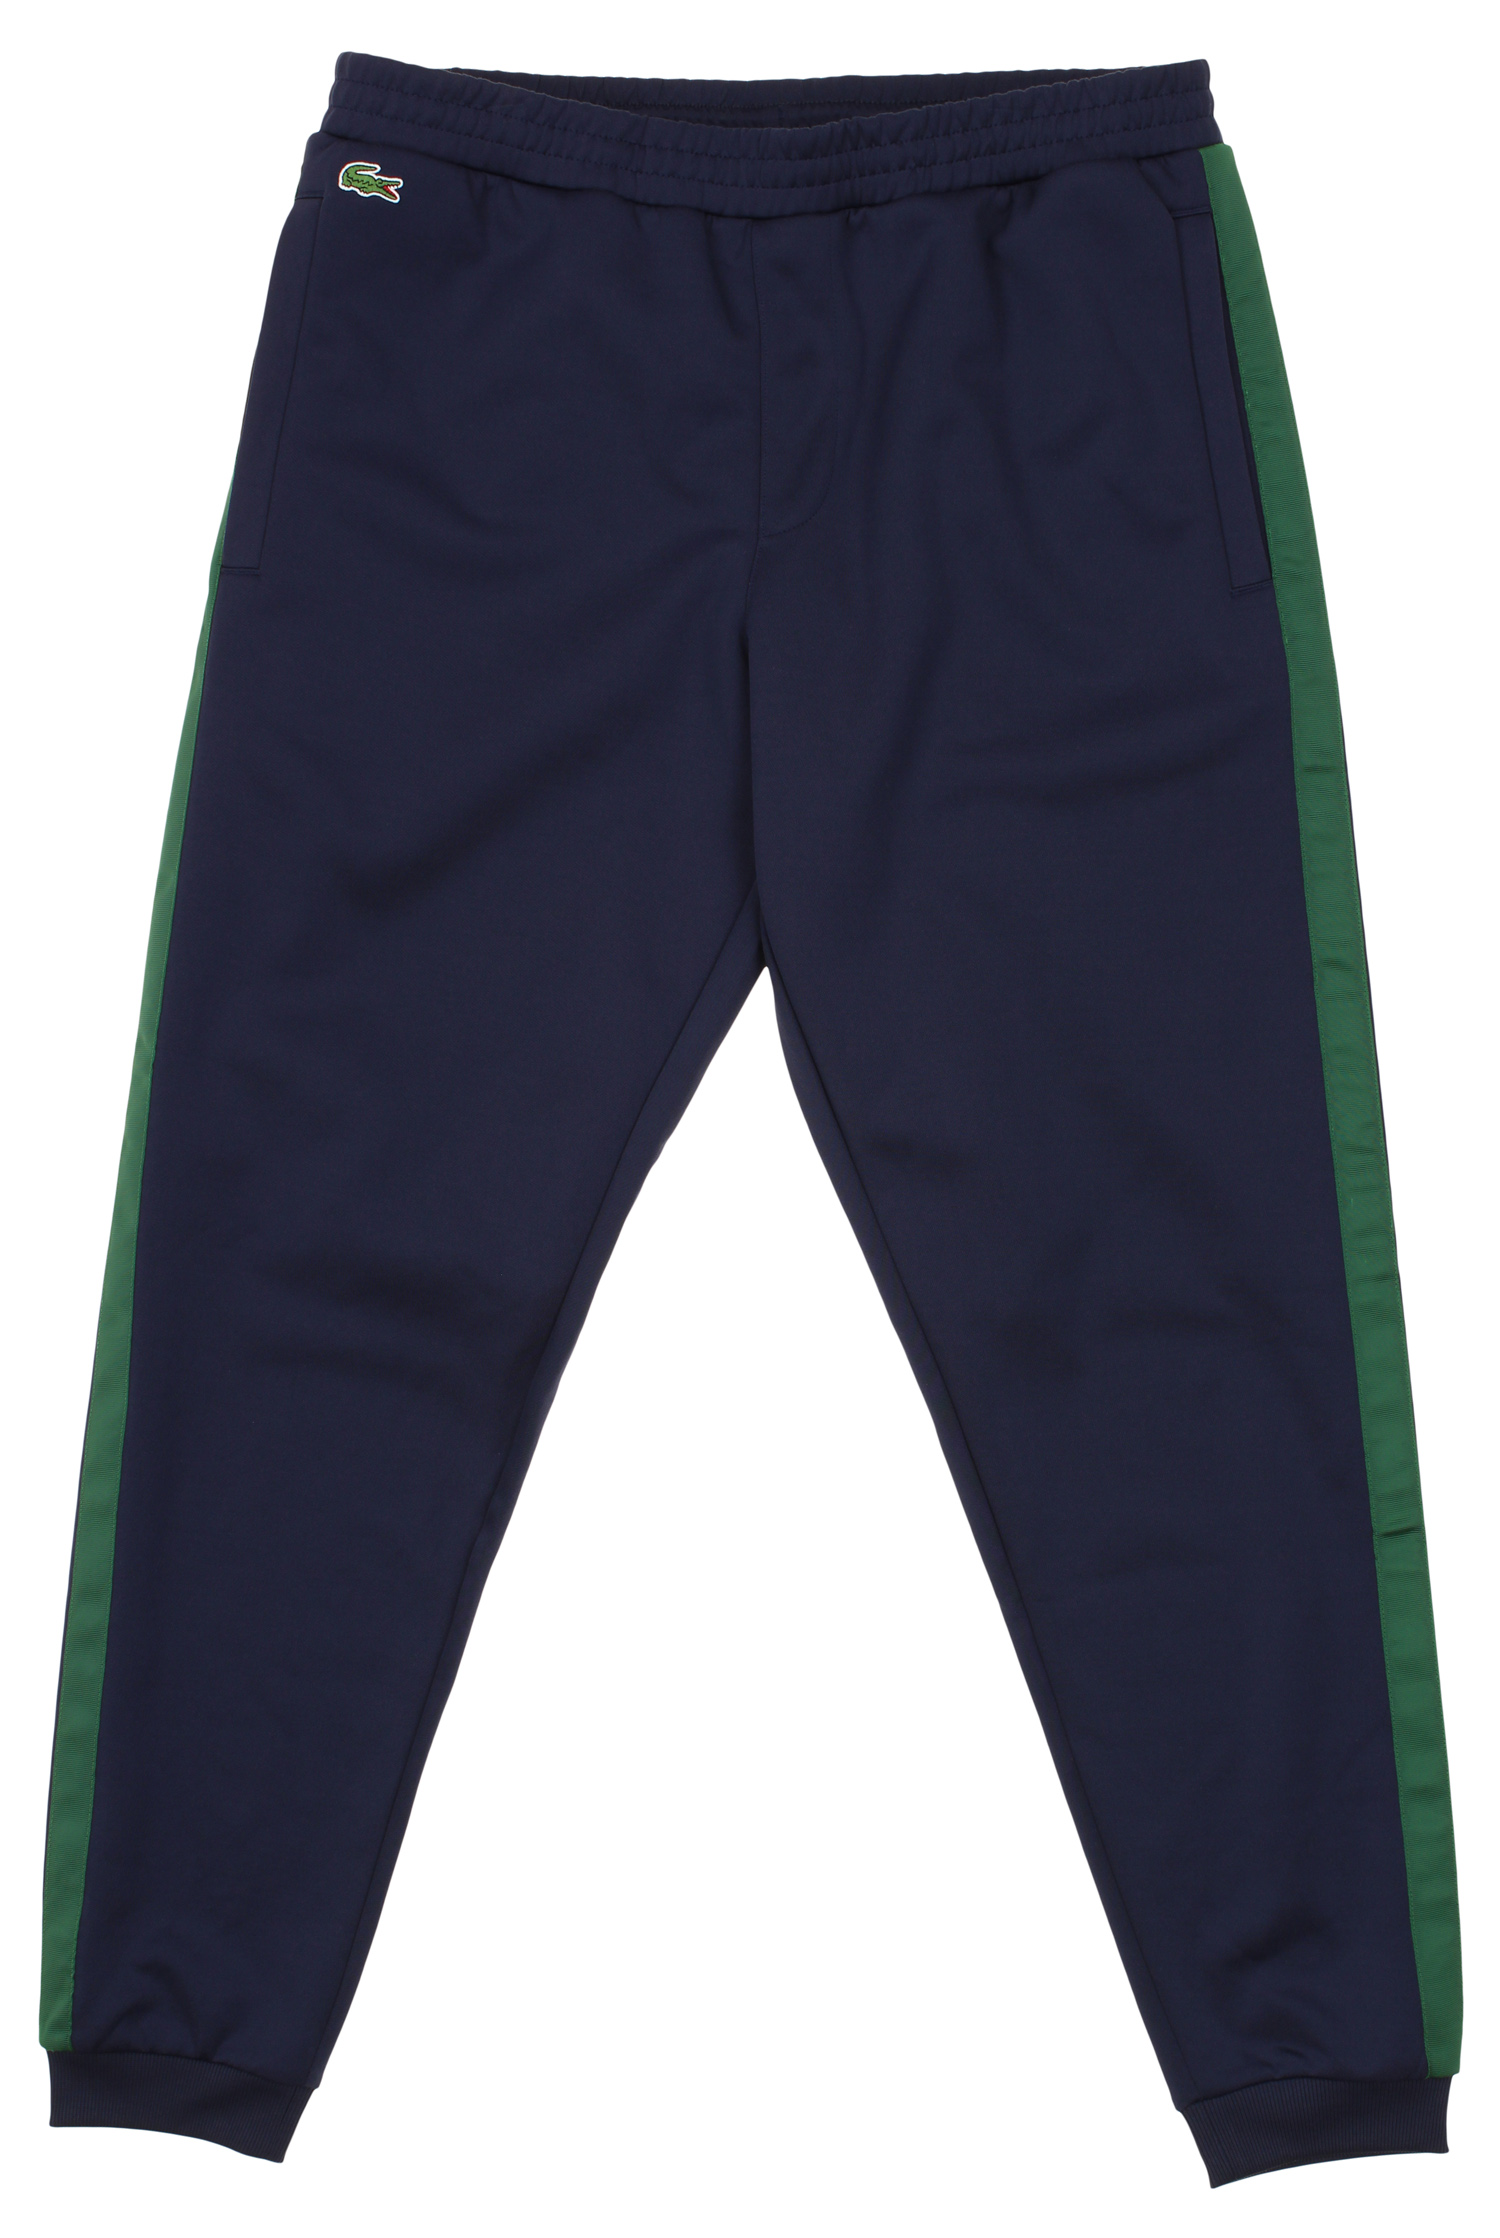 Lacoste Men's Colorblock Contrast Nylon Band Hertiage Trackpants, Navy ...